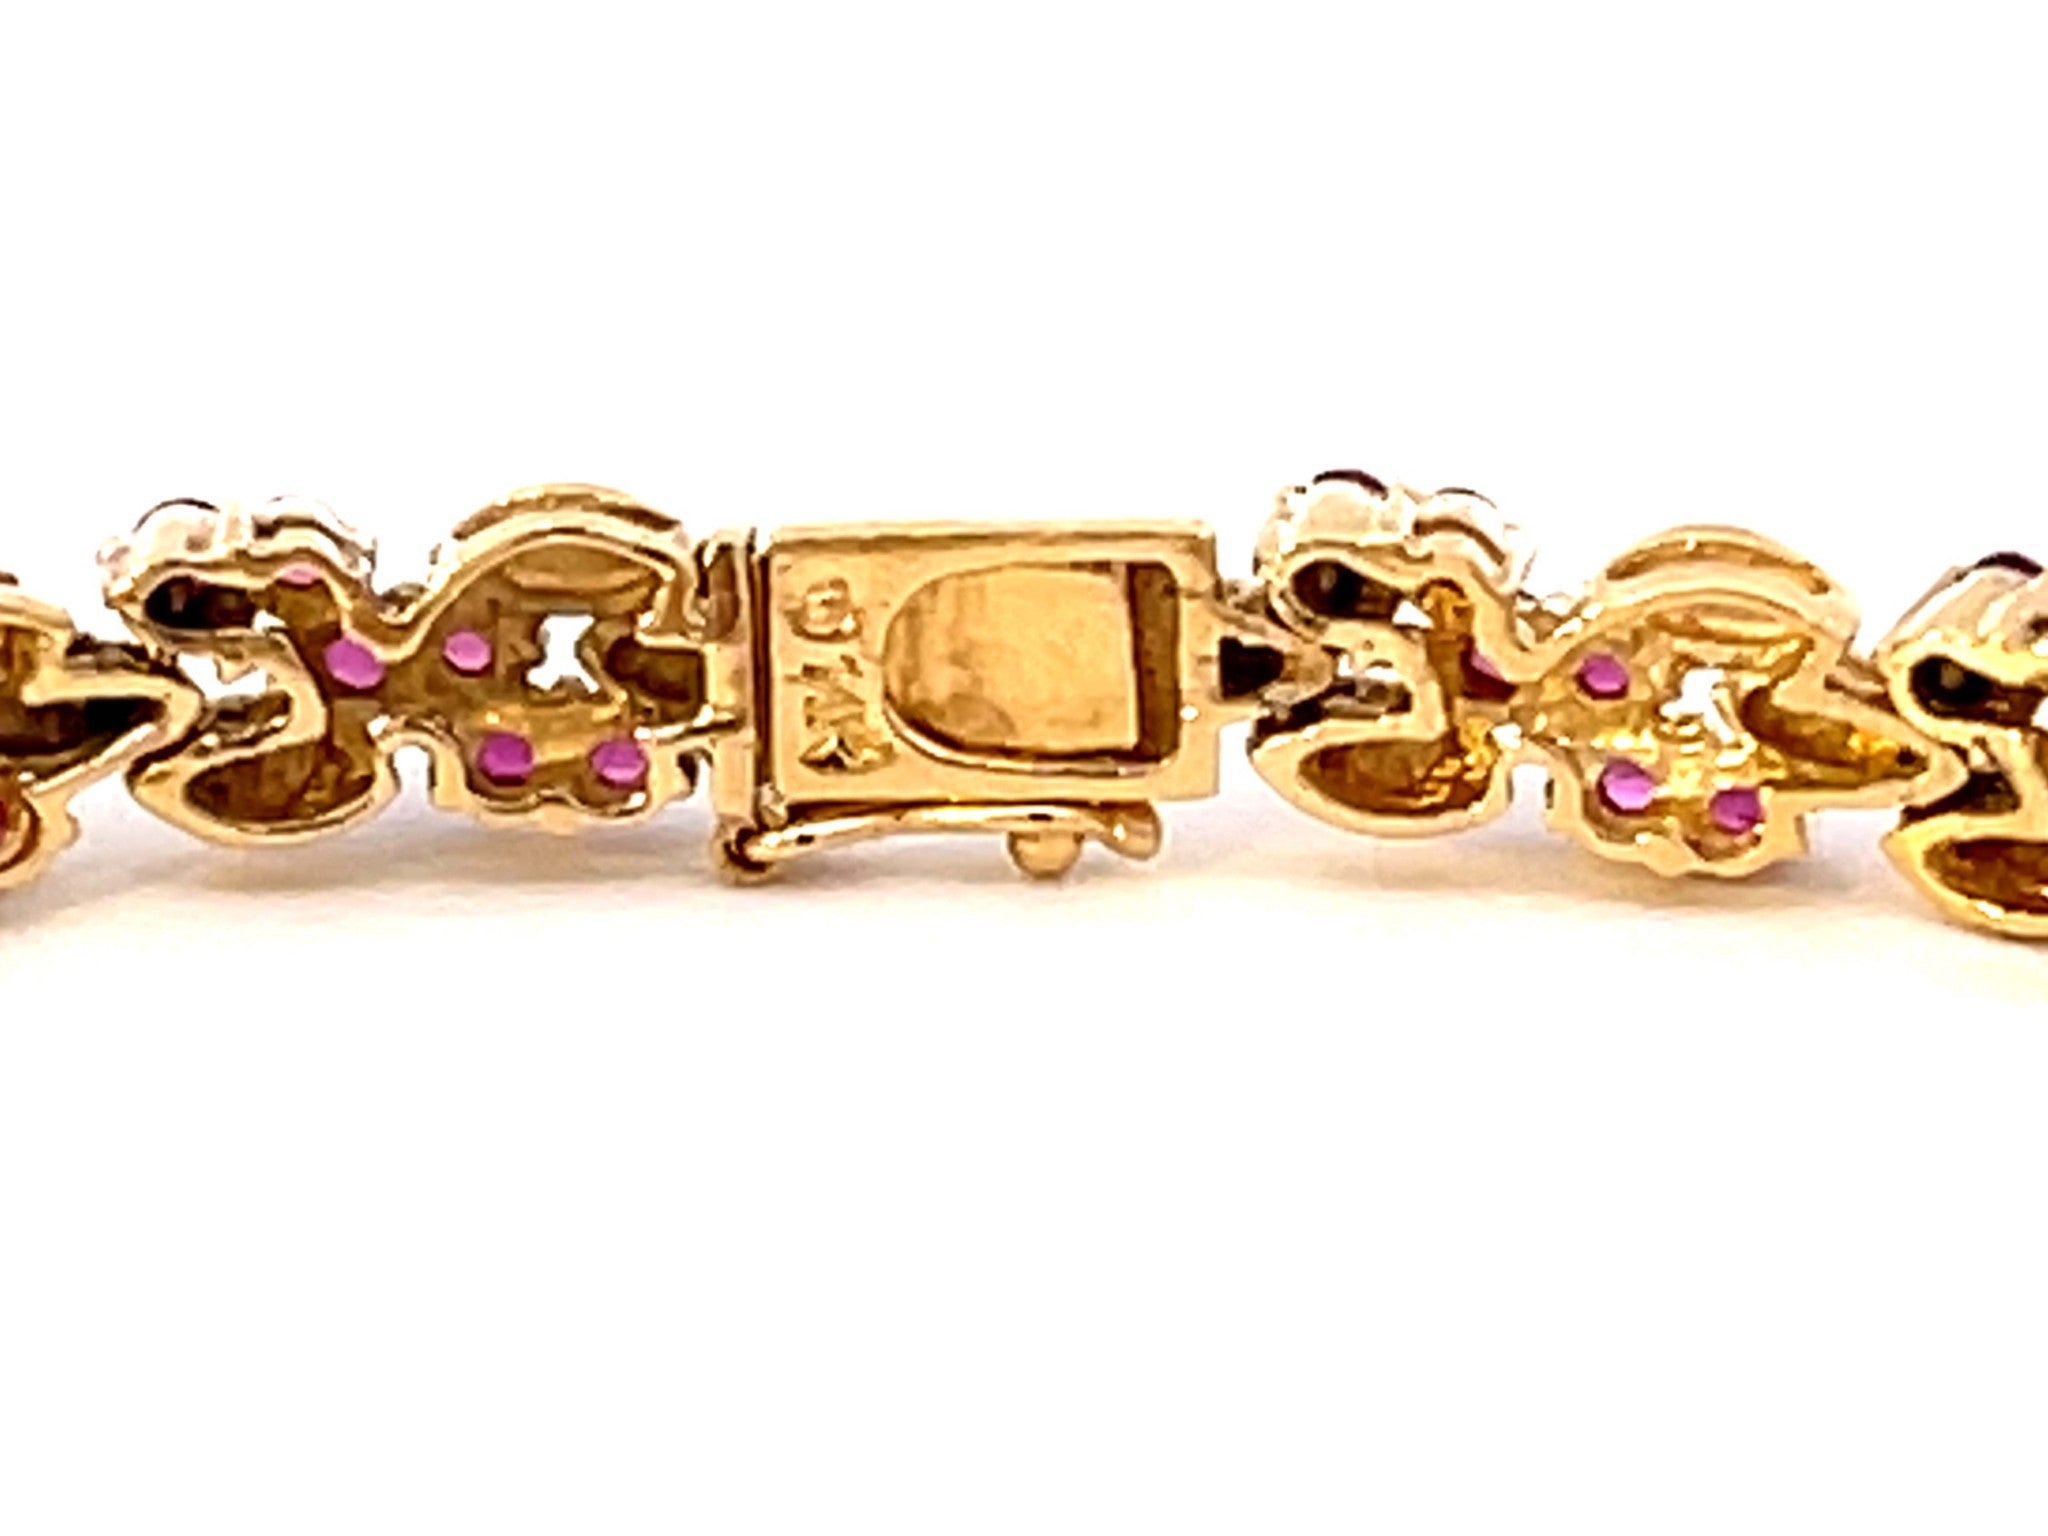 Round Red Ruby Gold Link Bracelet in 14k Yellow Gold